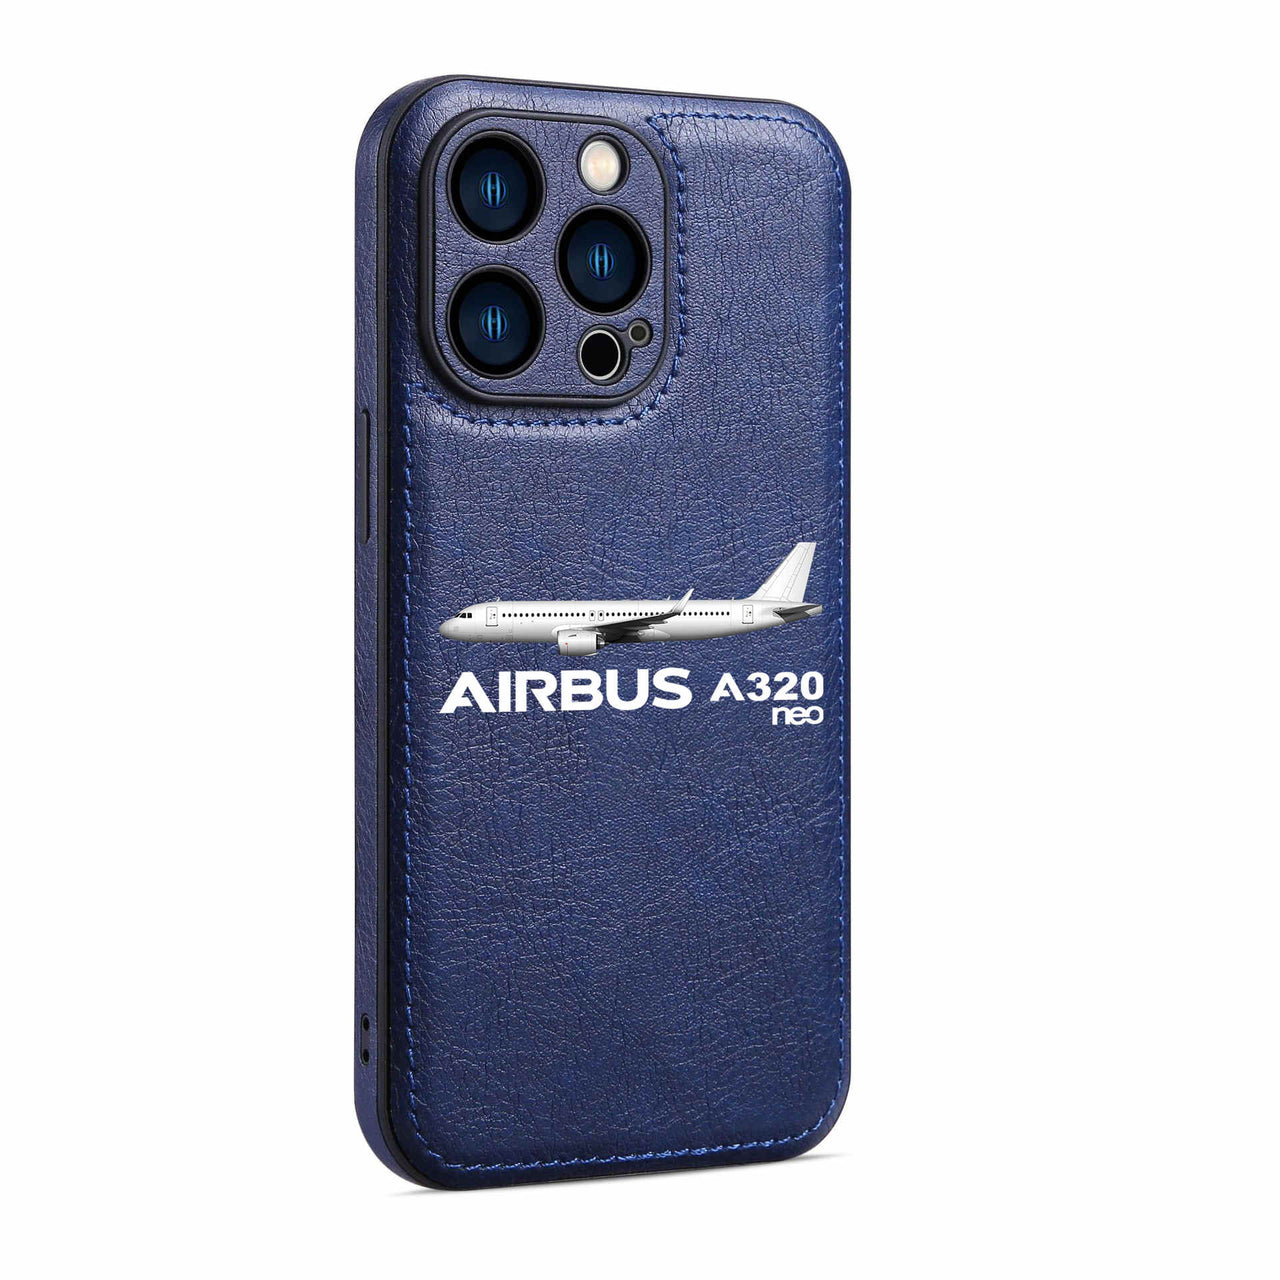 The Airbus A320Neo Designed Leather iPhone Cases